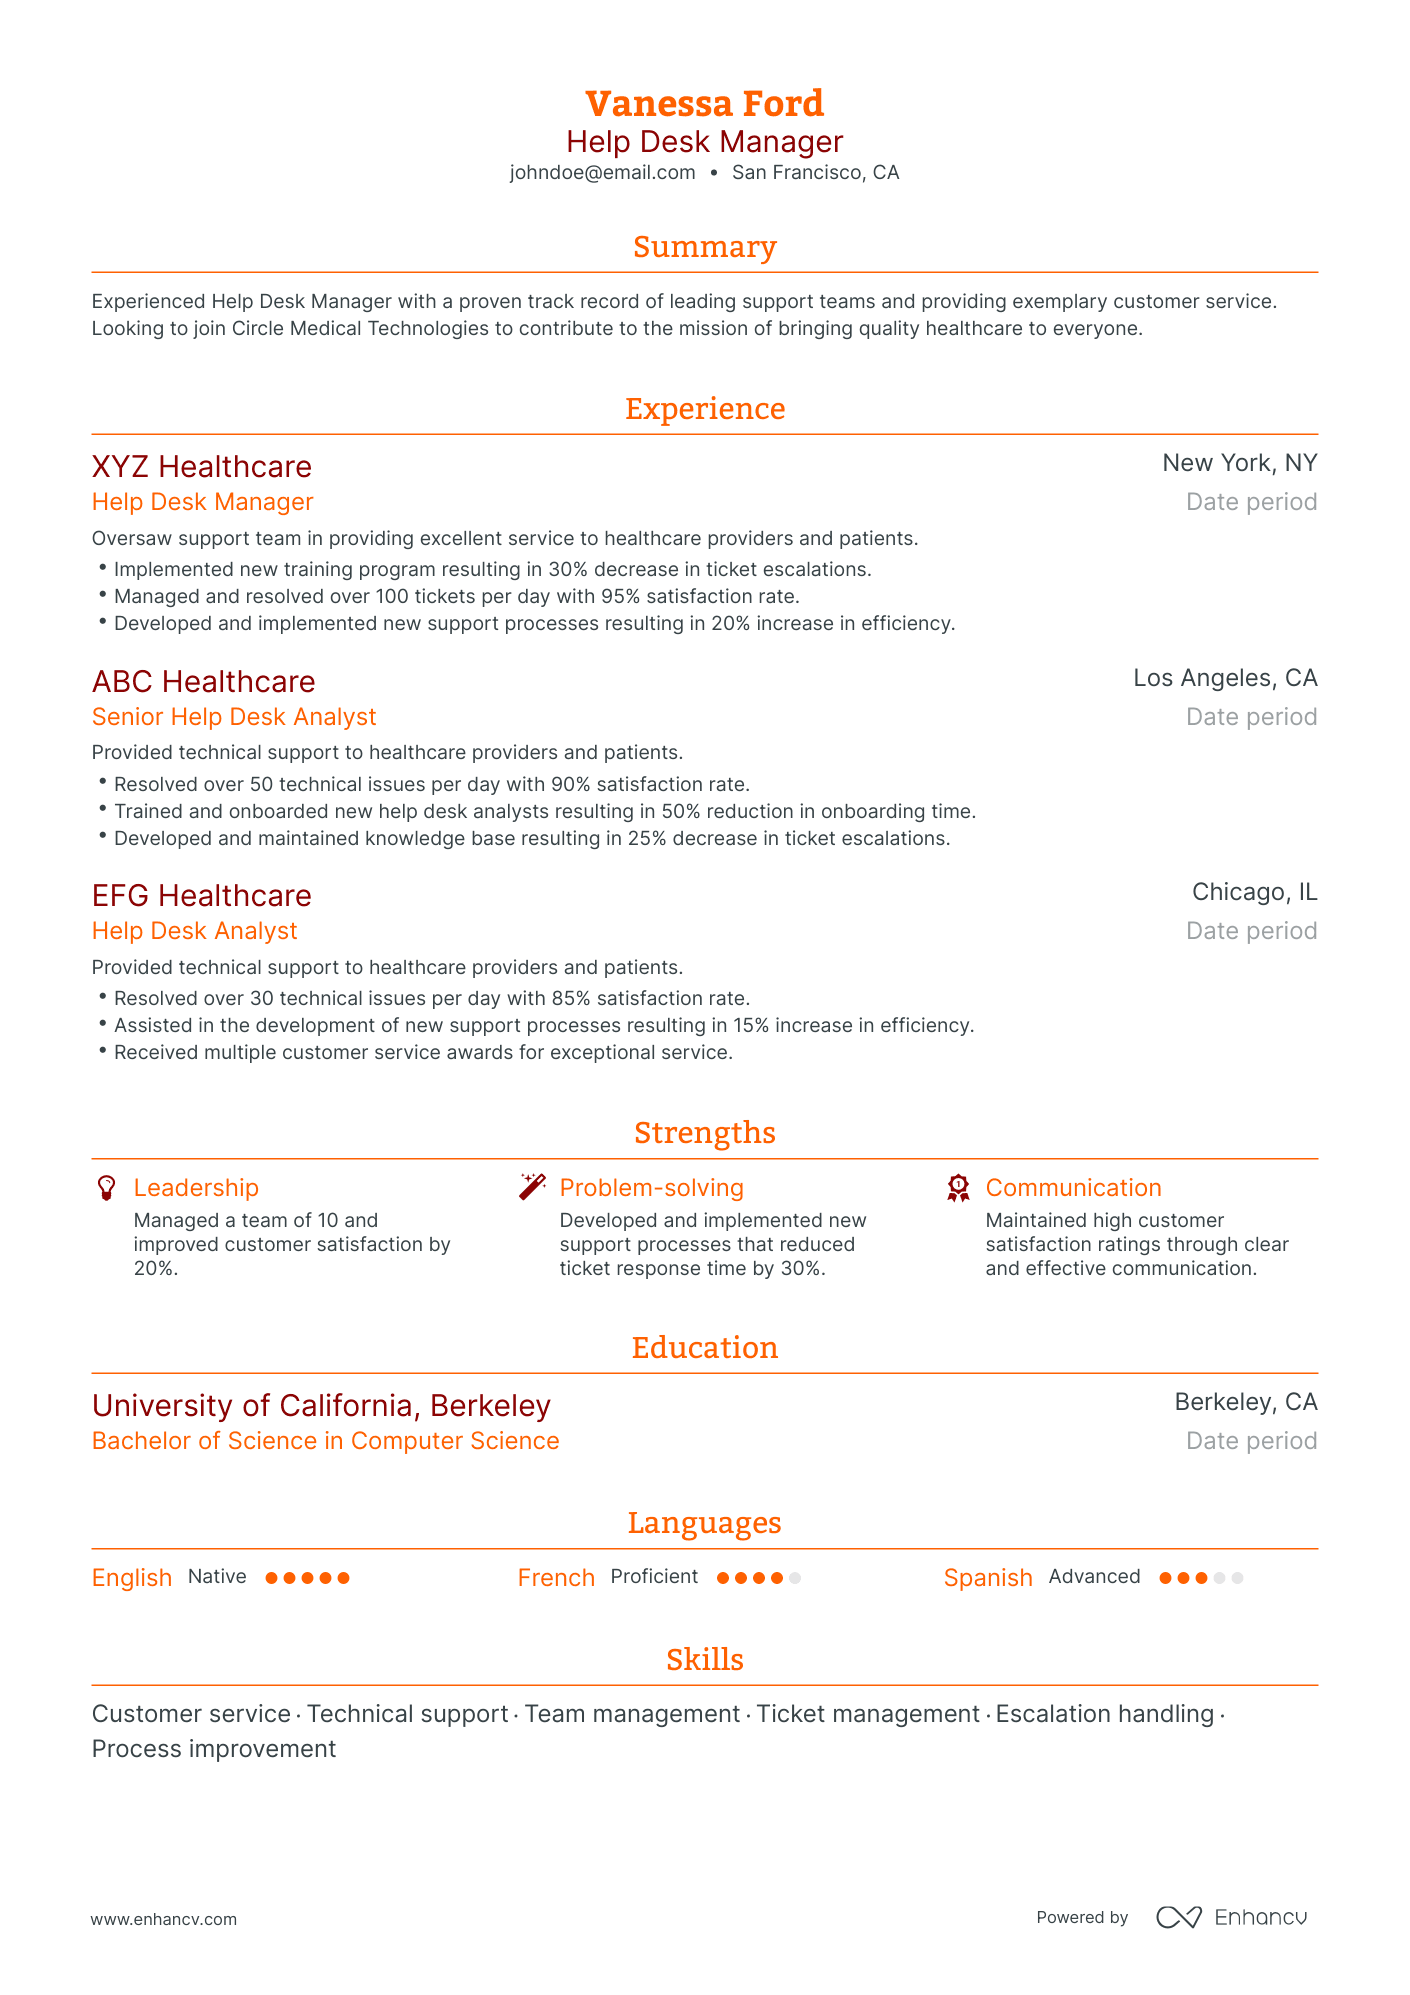 Traditional Help Desk Manager Resume Template